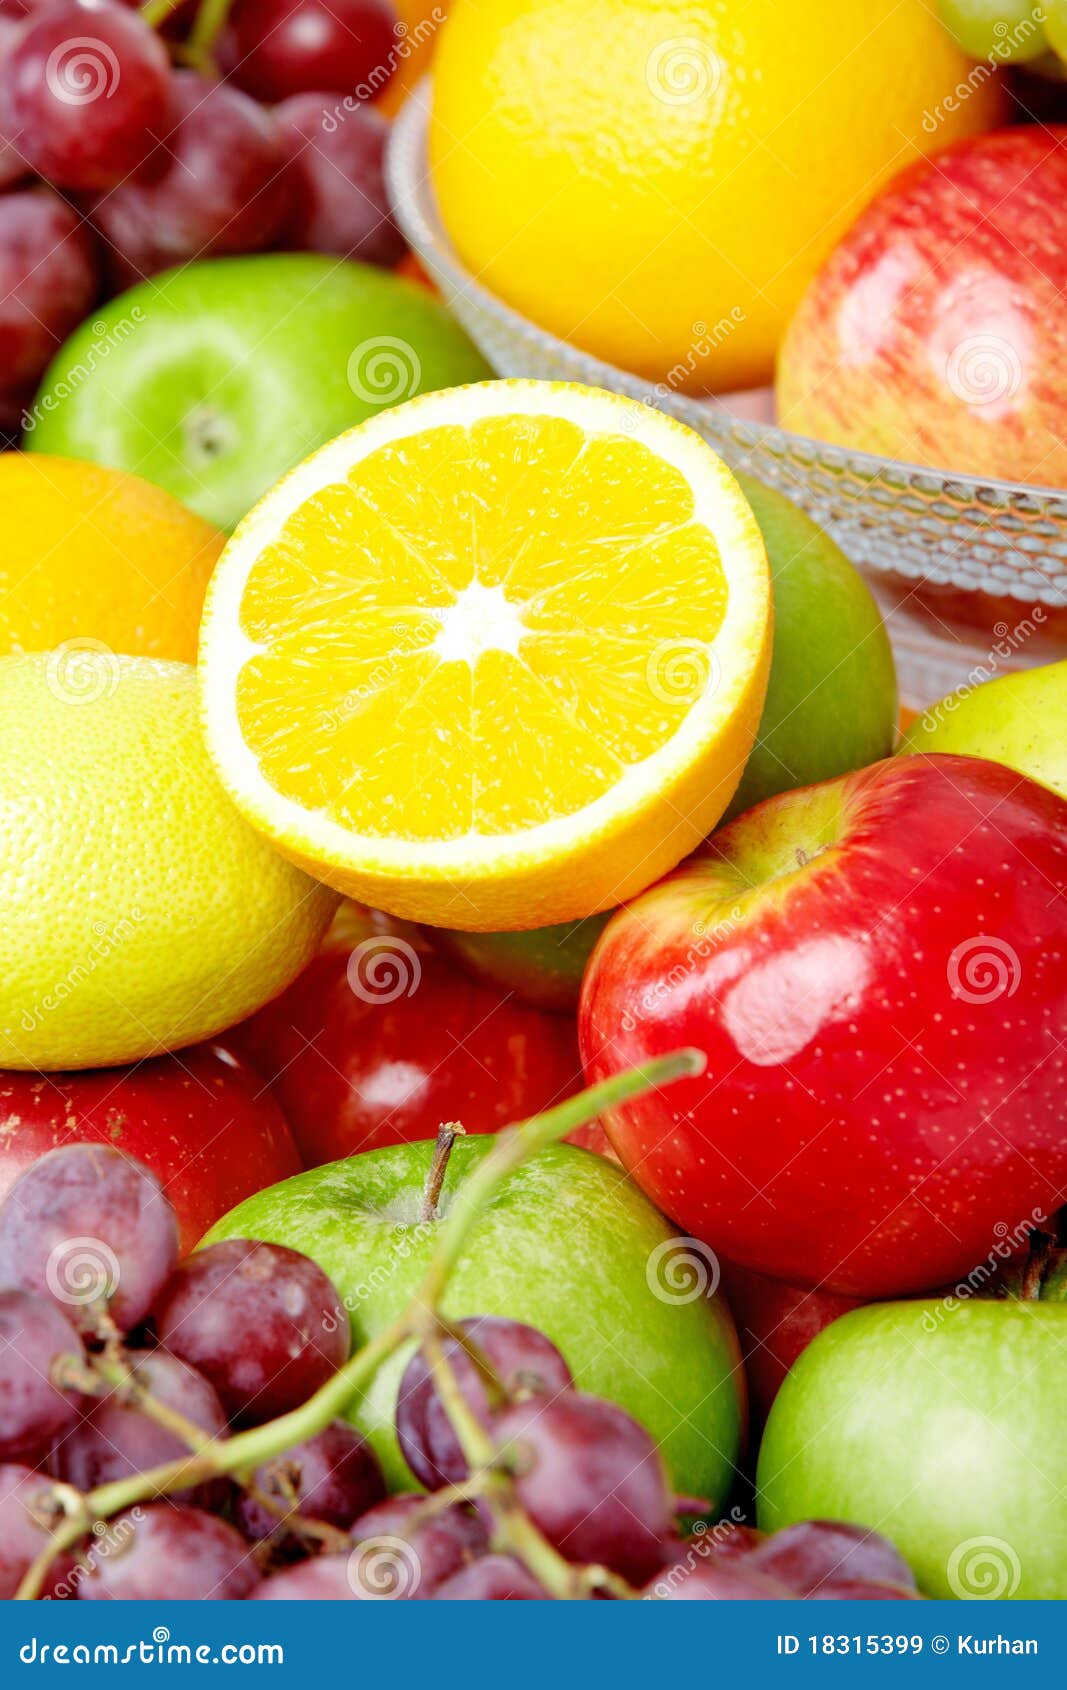 Vegetables and fruits stock image. Image of orange, health - 18315399